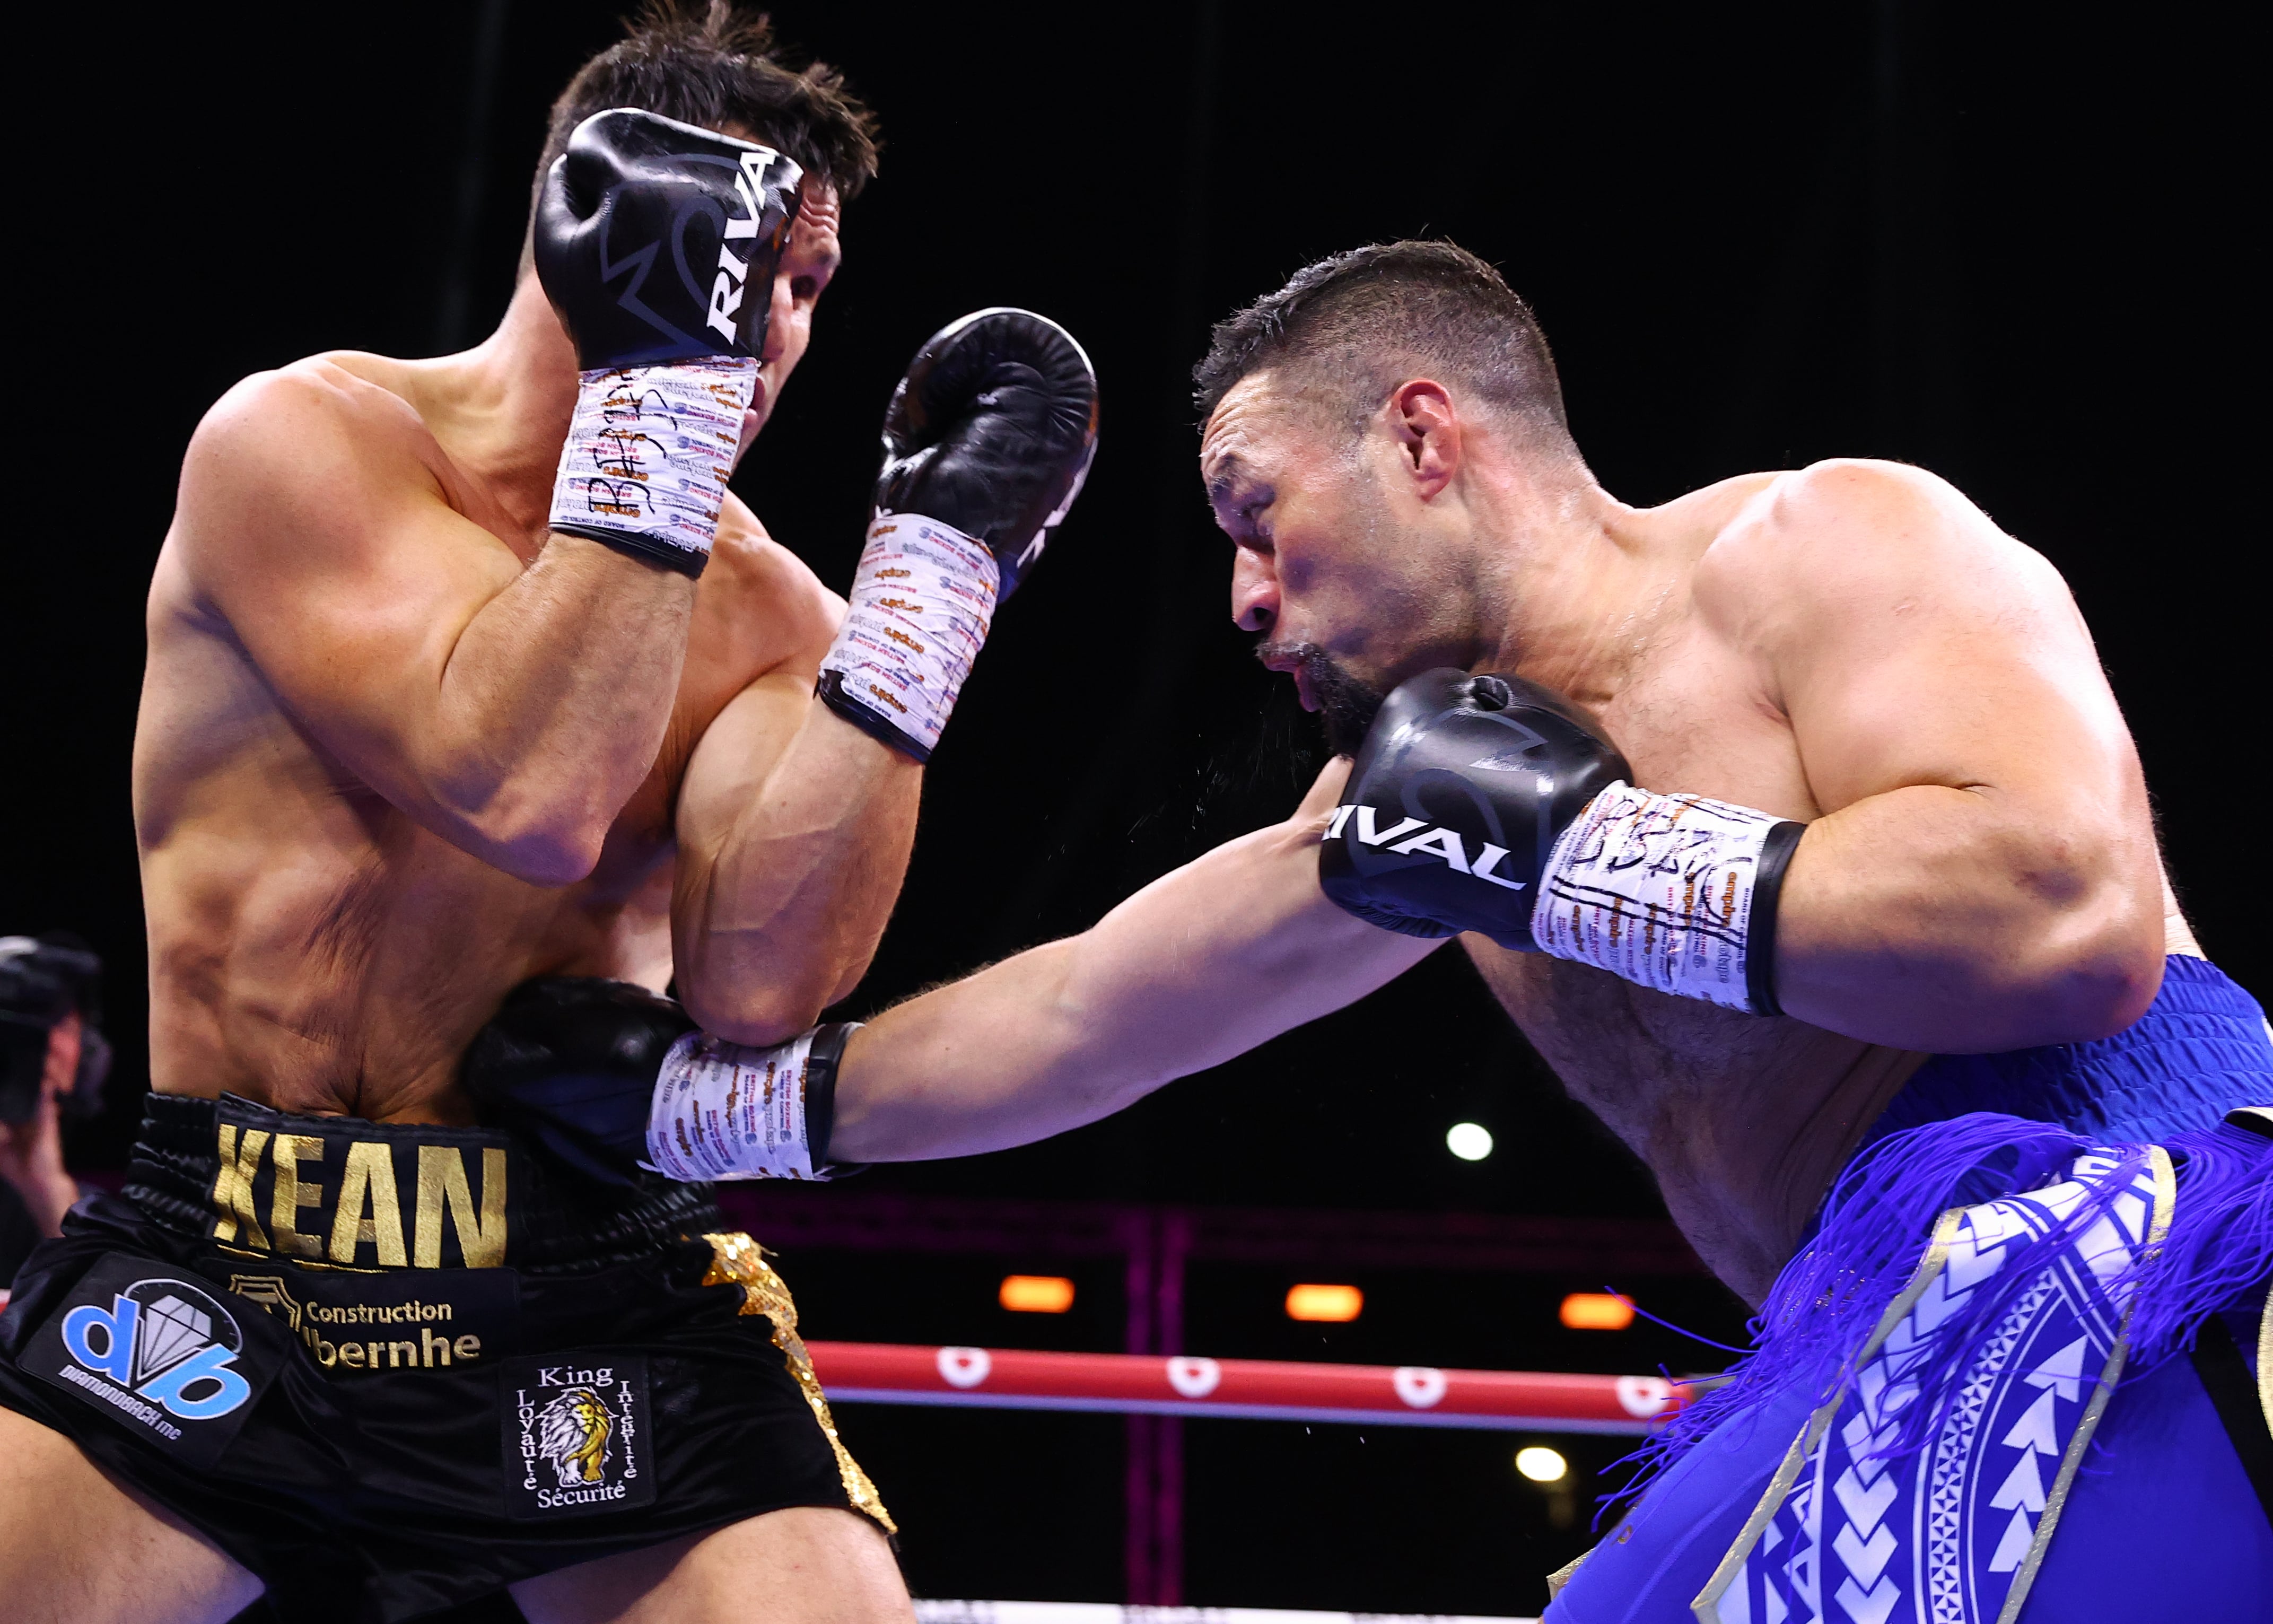 Classy Parker uppercut ends Kean ambitions in third round